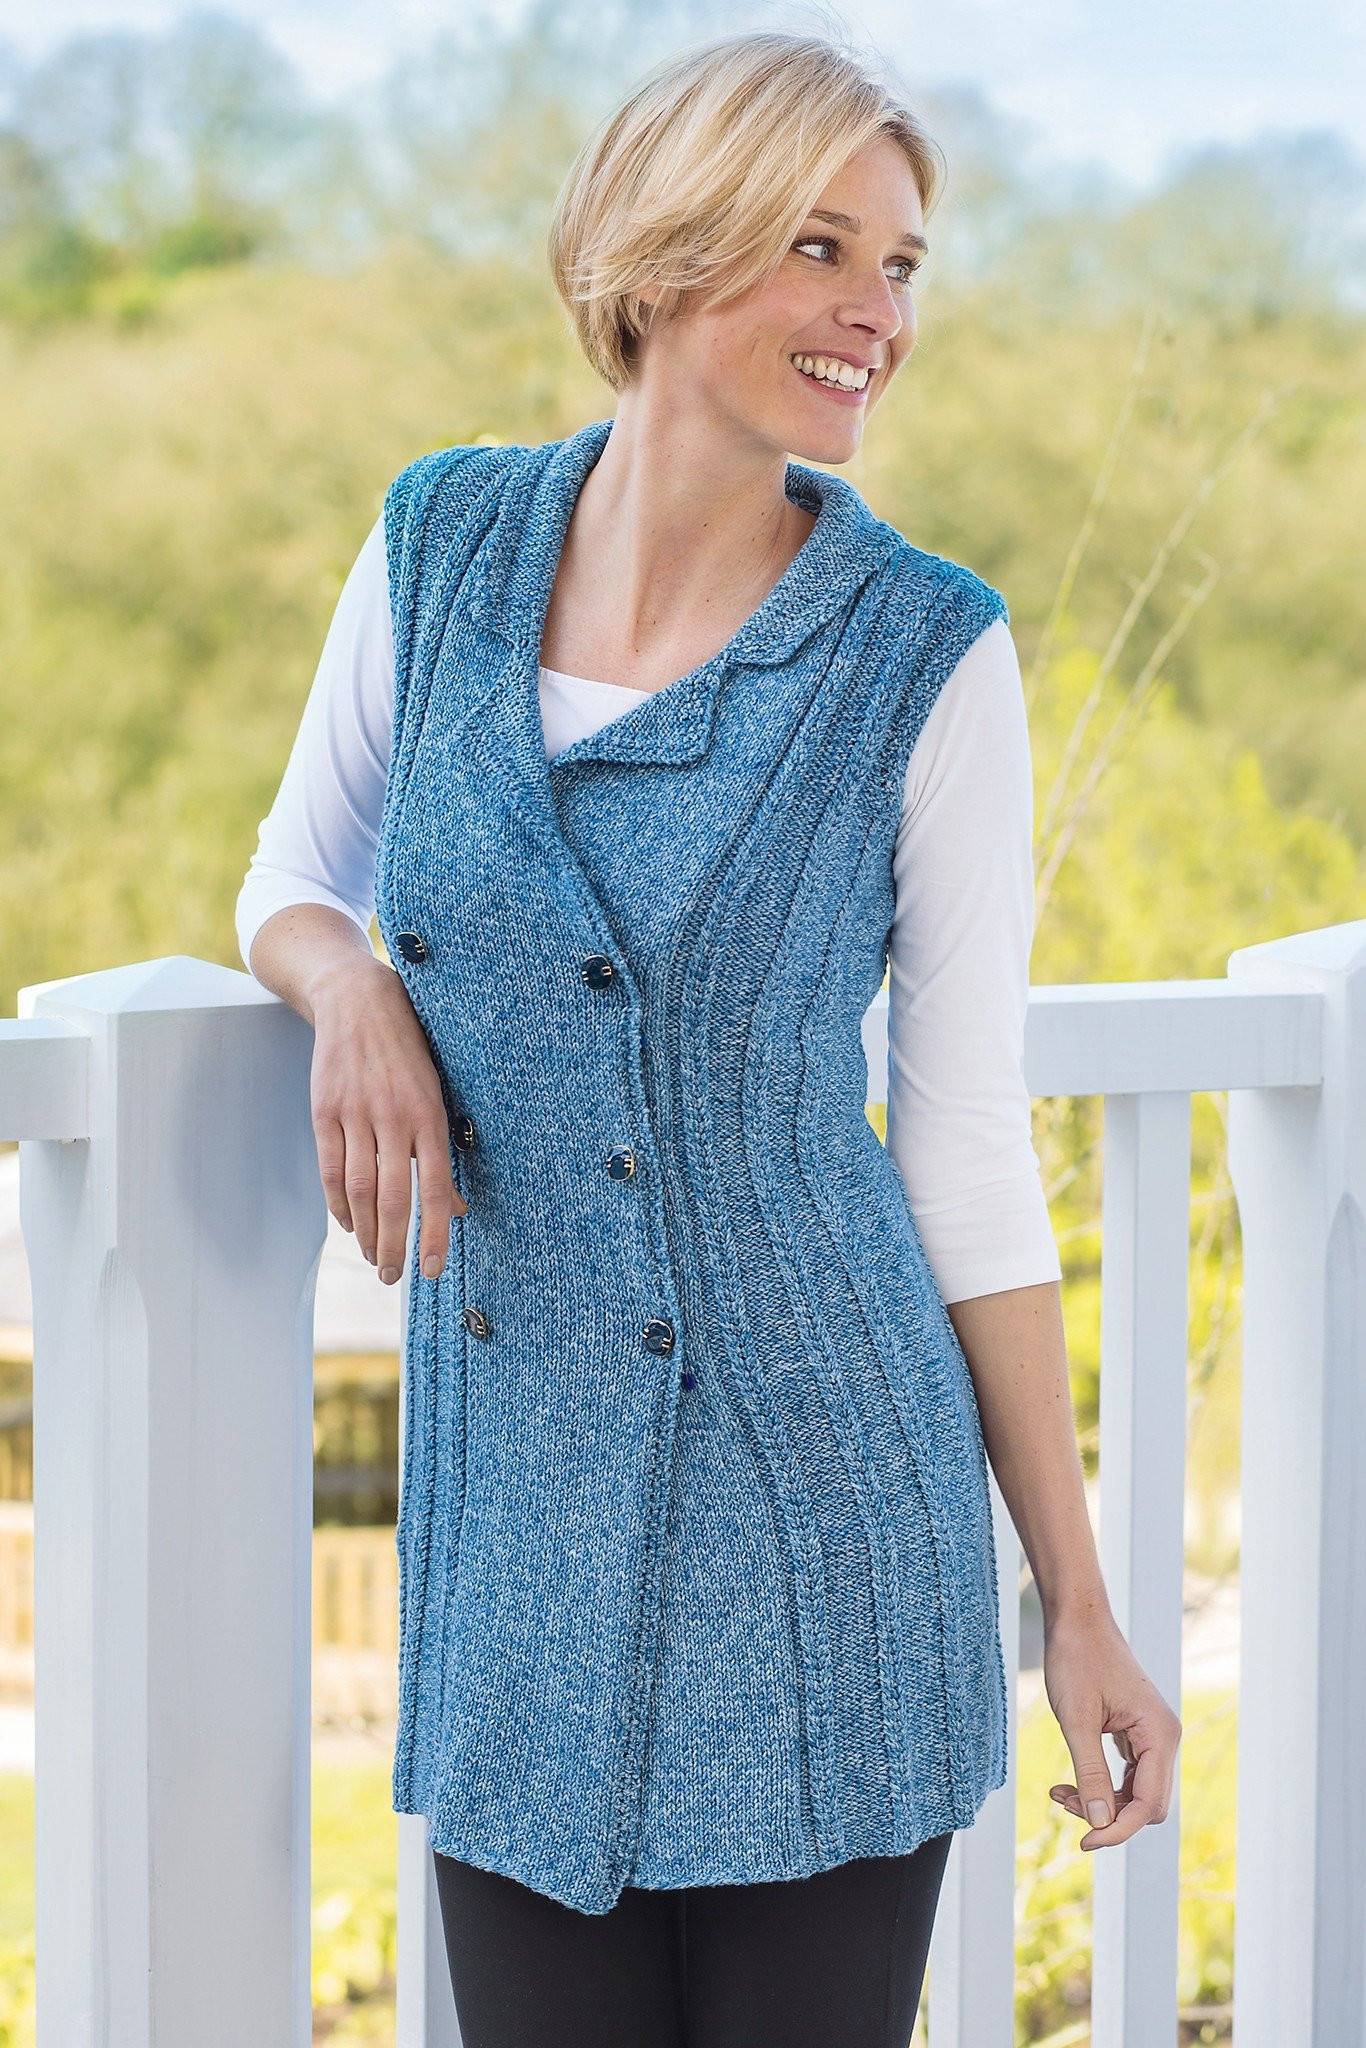 Roman Cable Ladies Waistcoat Knitting Pattern | The ...